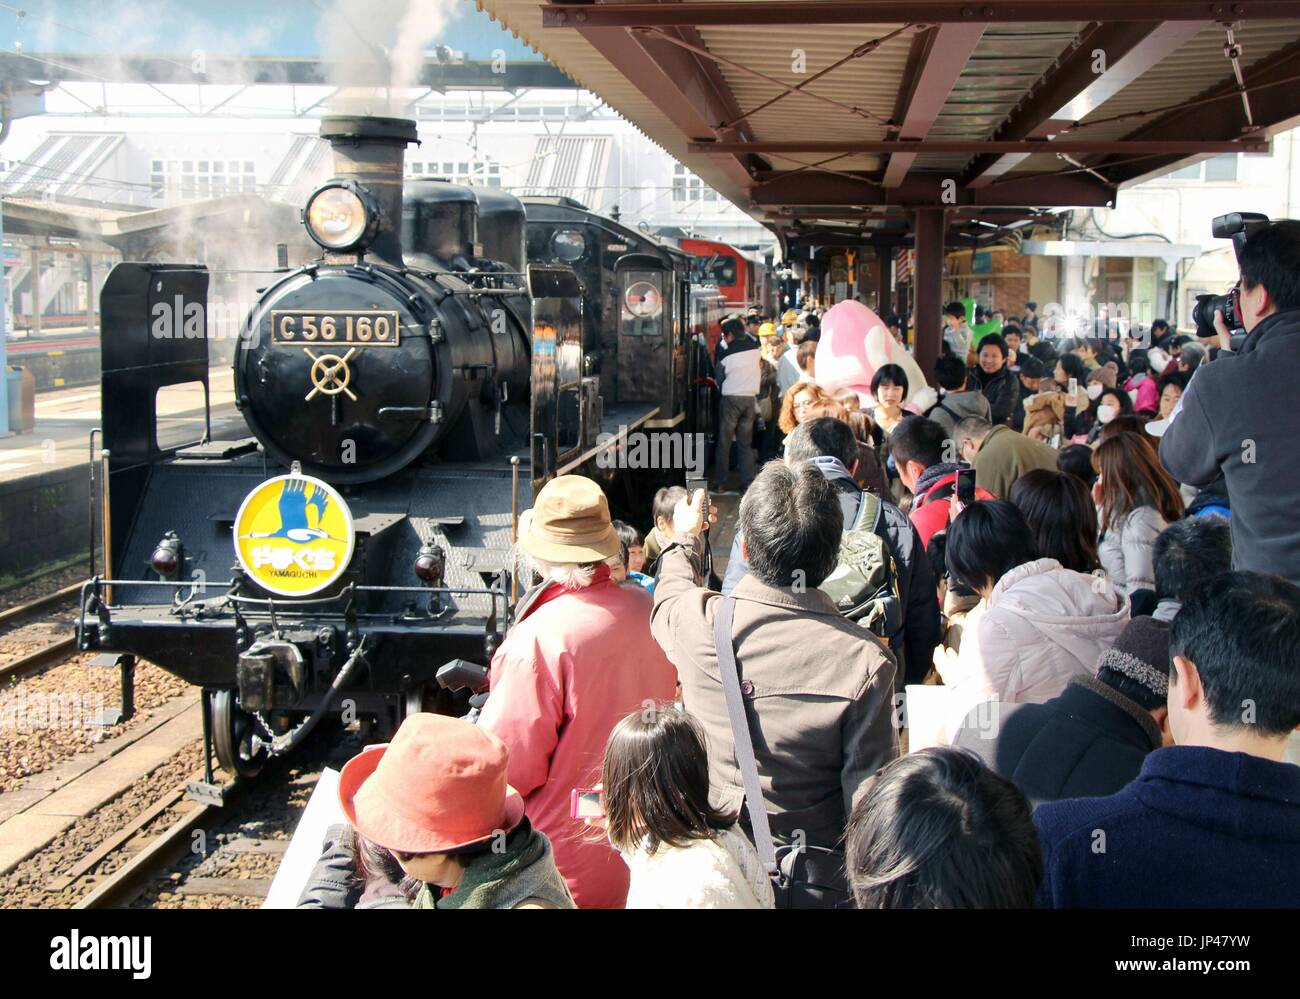 YAMAGUCHI, Japan - The steam locomotive 'SL Yamaguchi' resumes roundtrip service between Shin-Yamaguchi and Jifuku stations on the JR Yamaguchi Line in Yamaguchi Prefecture on March 21, 2014. The train had operated service only one way between these stations from November 2013 after services on the line were partially suspended due to torrential rain damage sustained in July 2013. (Kyodo) Stock Photo